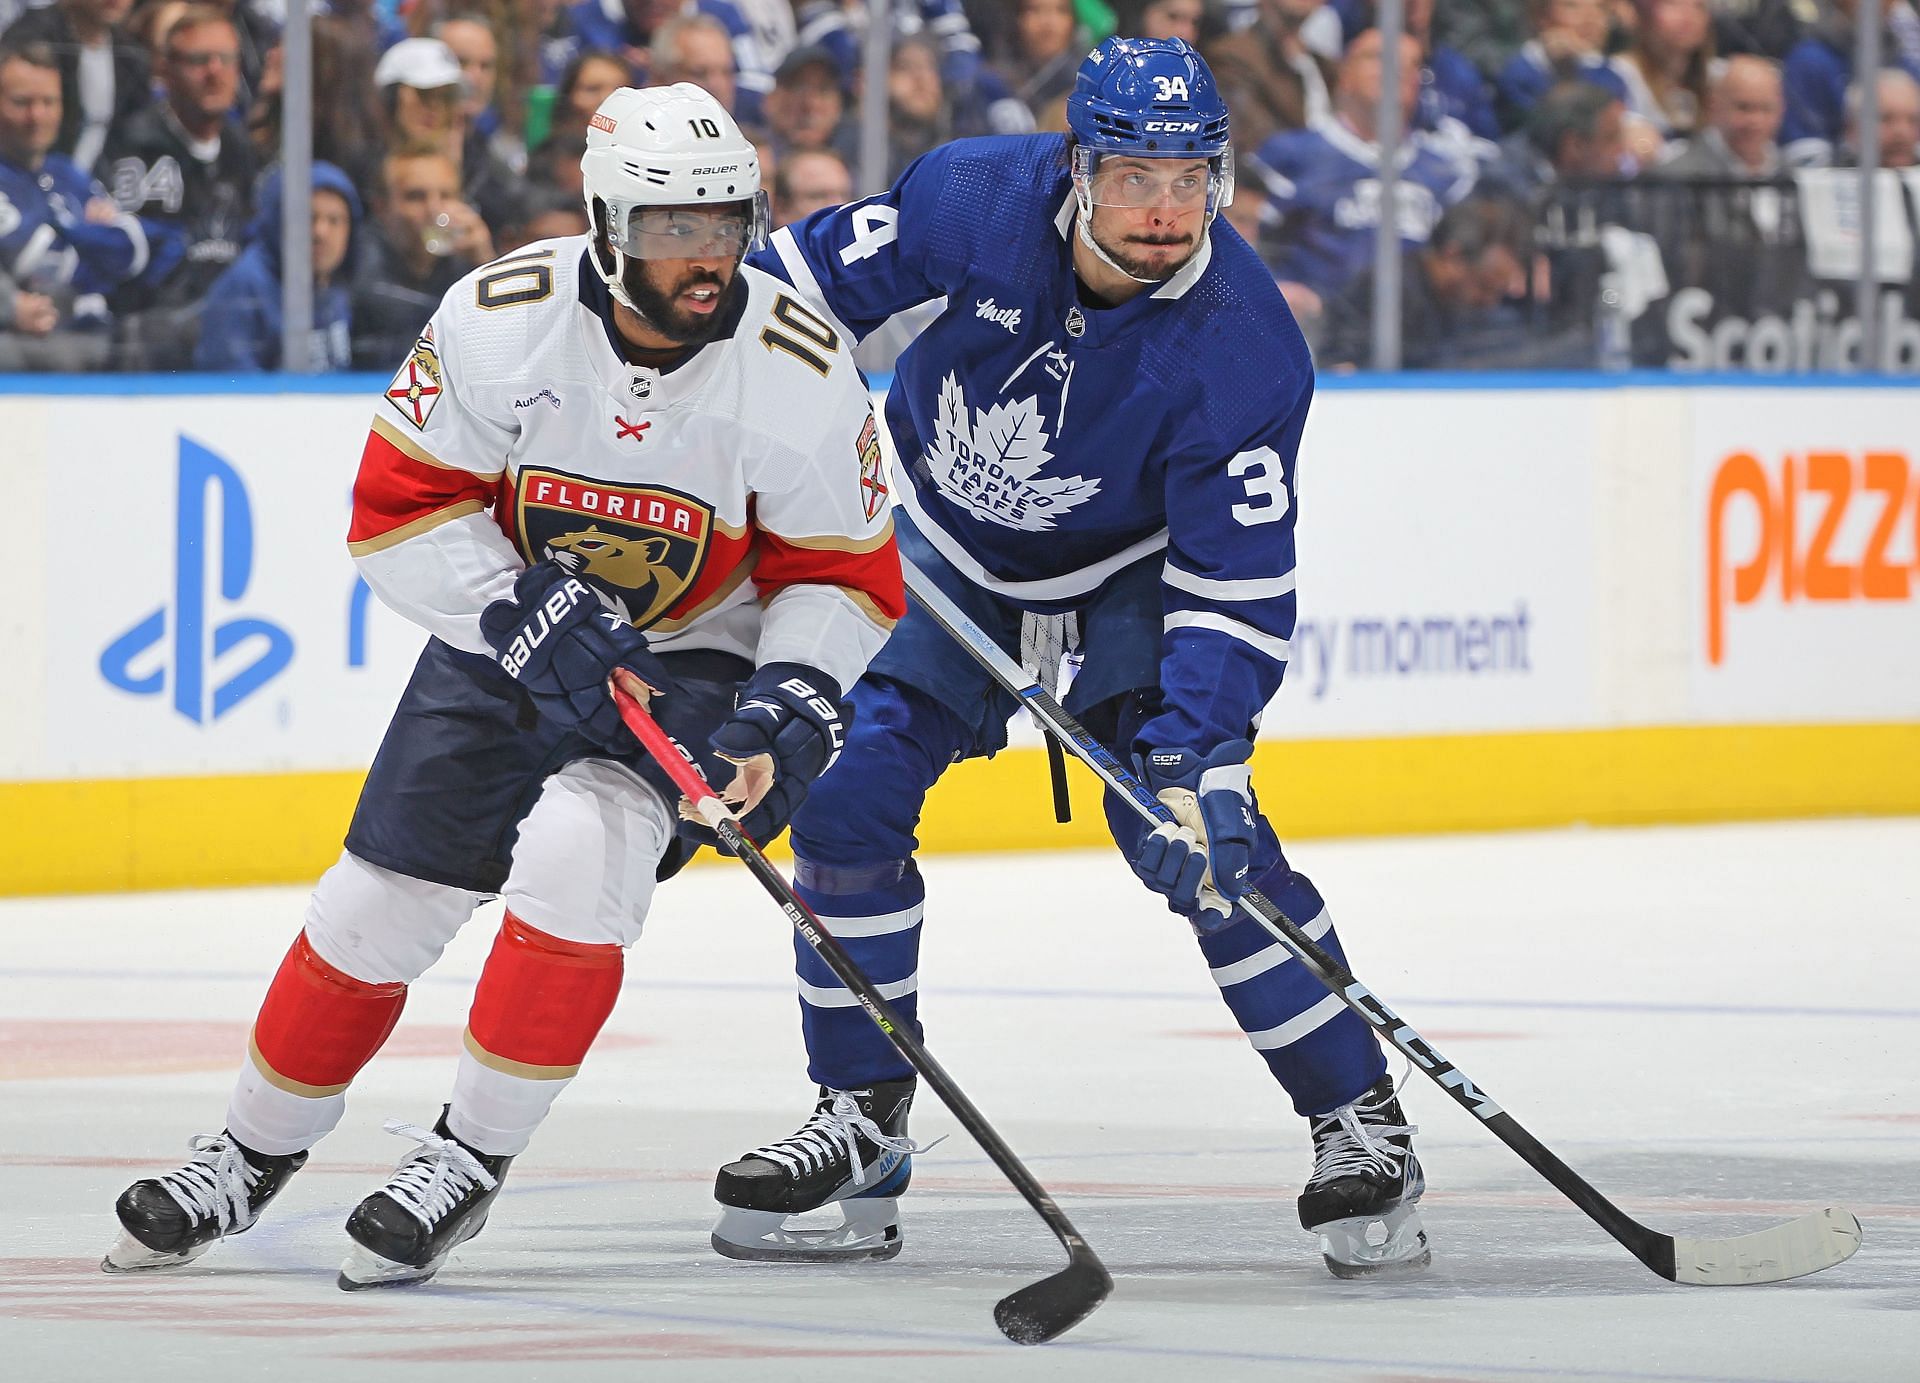 Toronto Maple Leafs Vs Florida Panthers Game 3 How To Watch Tv